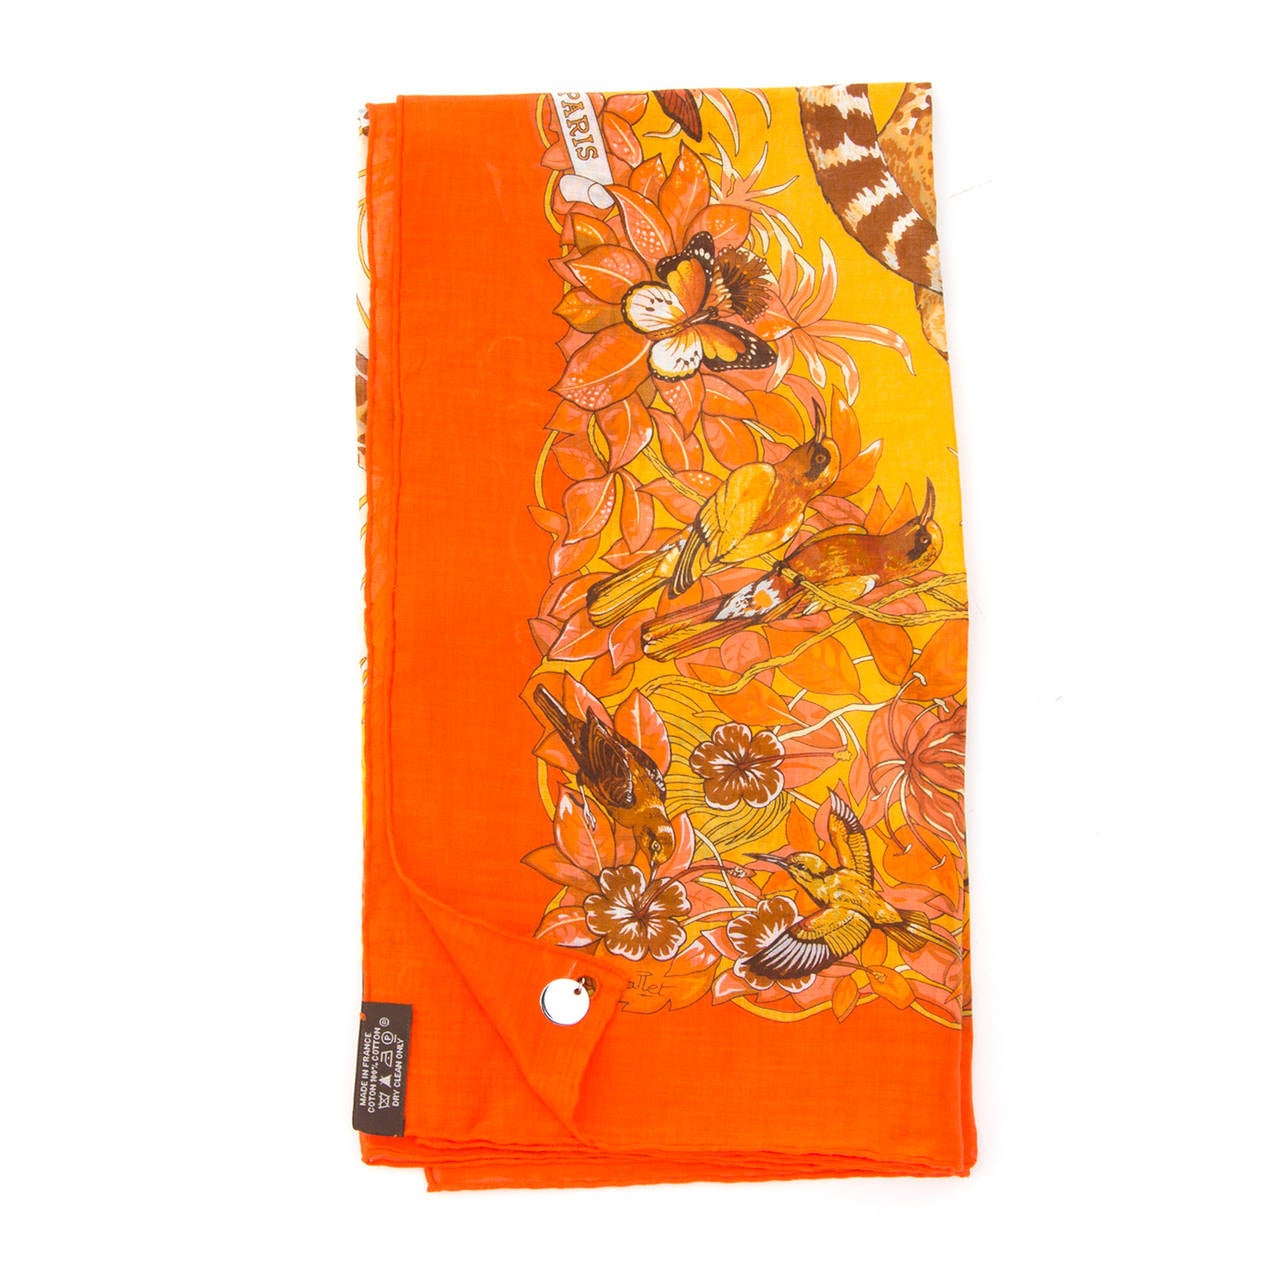 Hermes Jungle Love Cotton Scarf in vibrant orange colours designed by Robert Dallet, a naturalist who works for the National Natural History Museum in Paris.